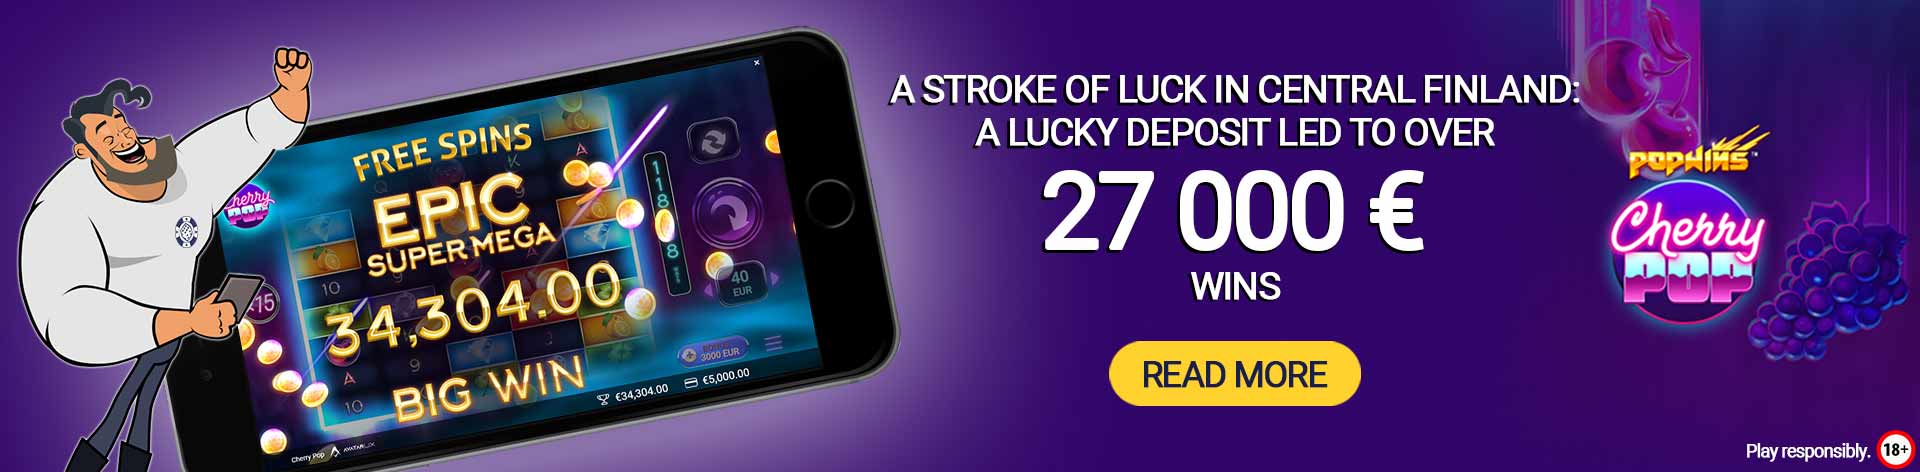 A stroke of luck in Central Finland: a lucky deposit led to over 27 000 € wins. Read more...